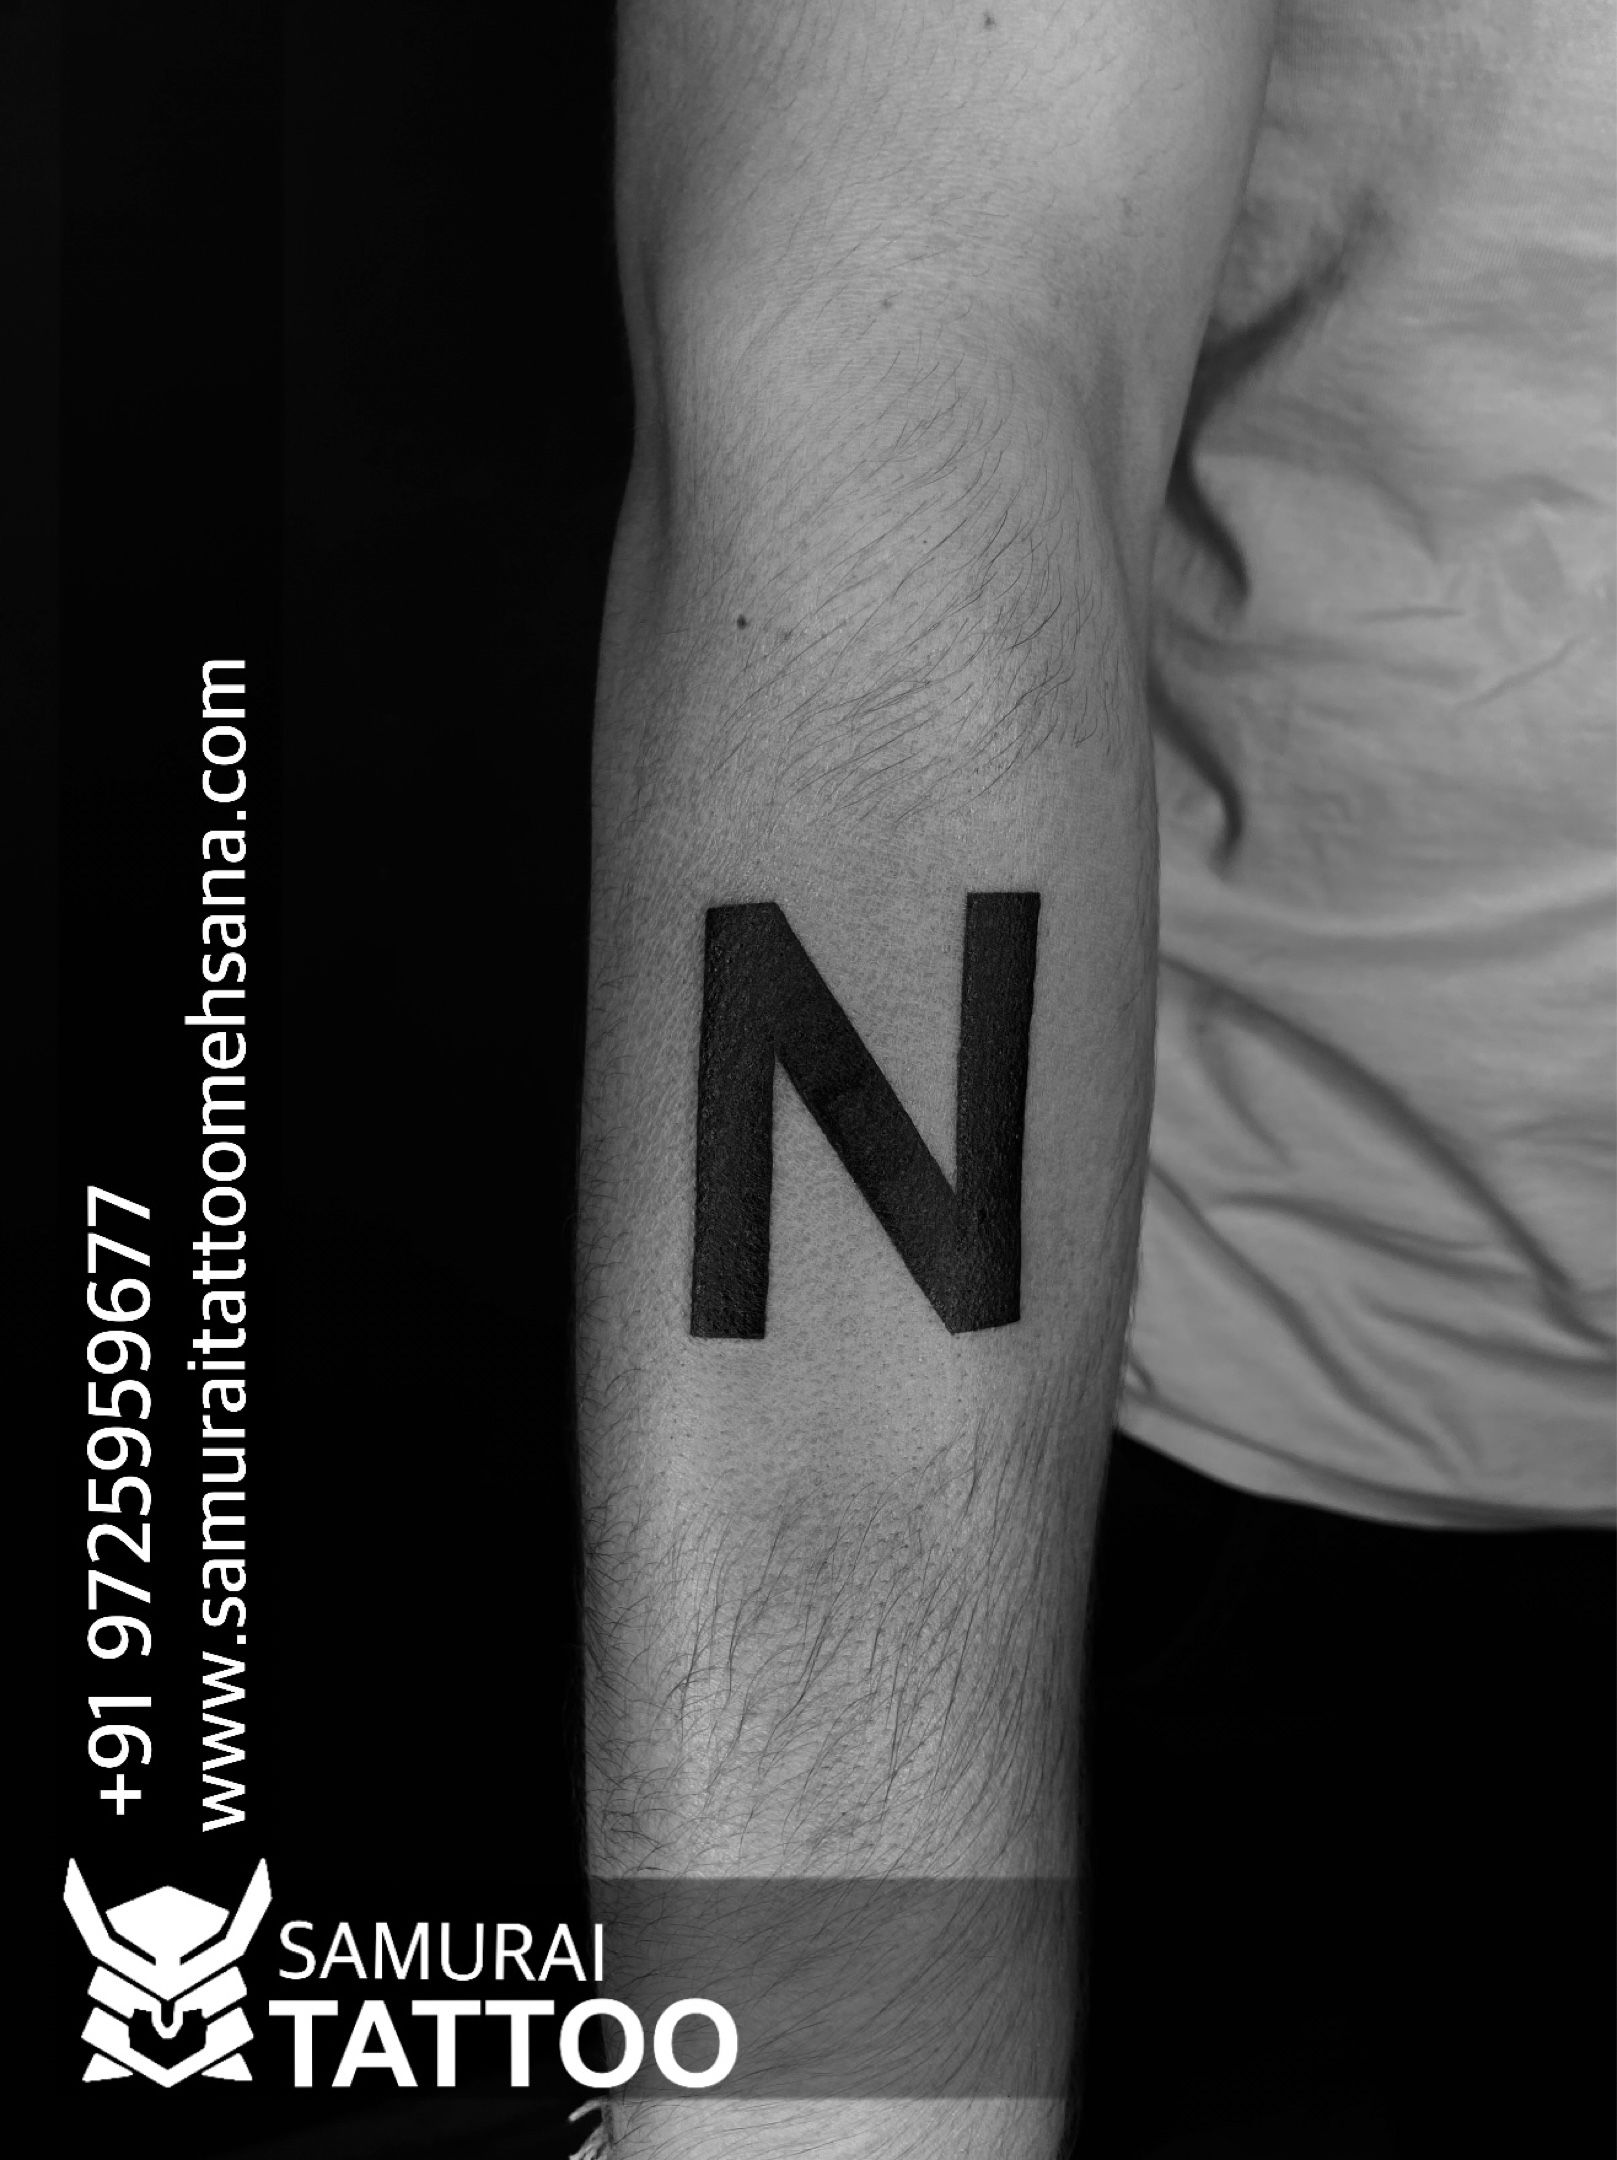 Tattoo uploaded by Marcus Urdiales • Old English Letter N #Letters  #Alphabet #OldEnglish • Tattoodo